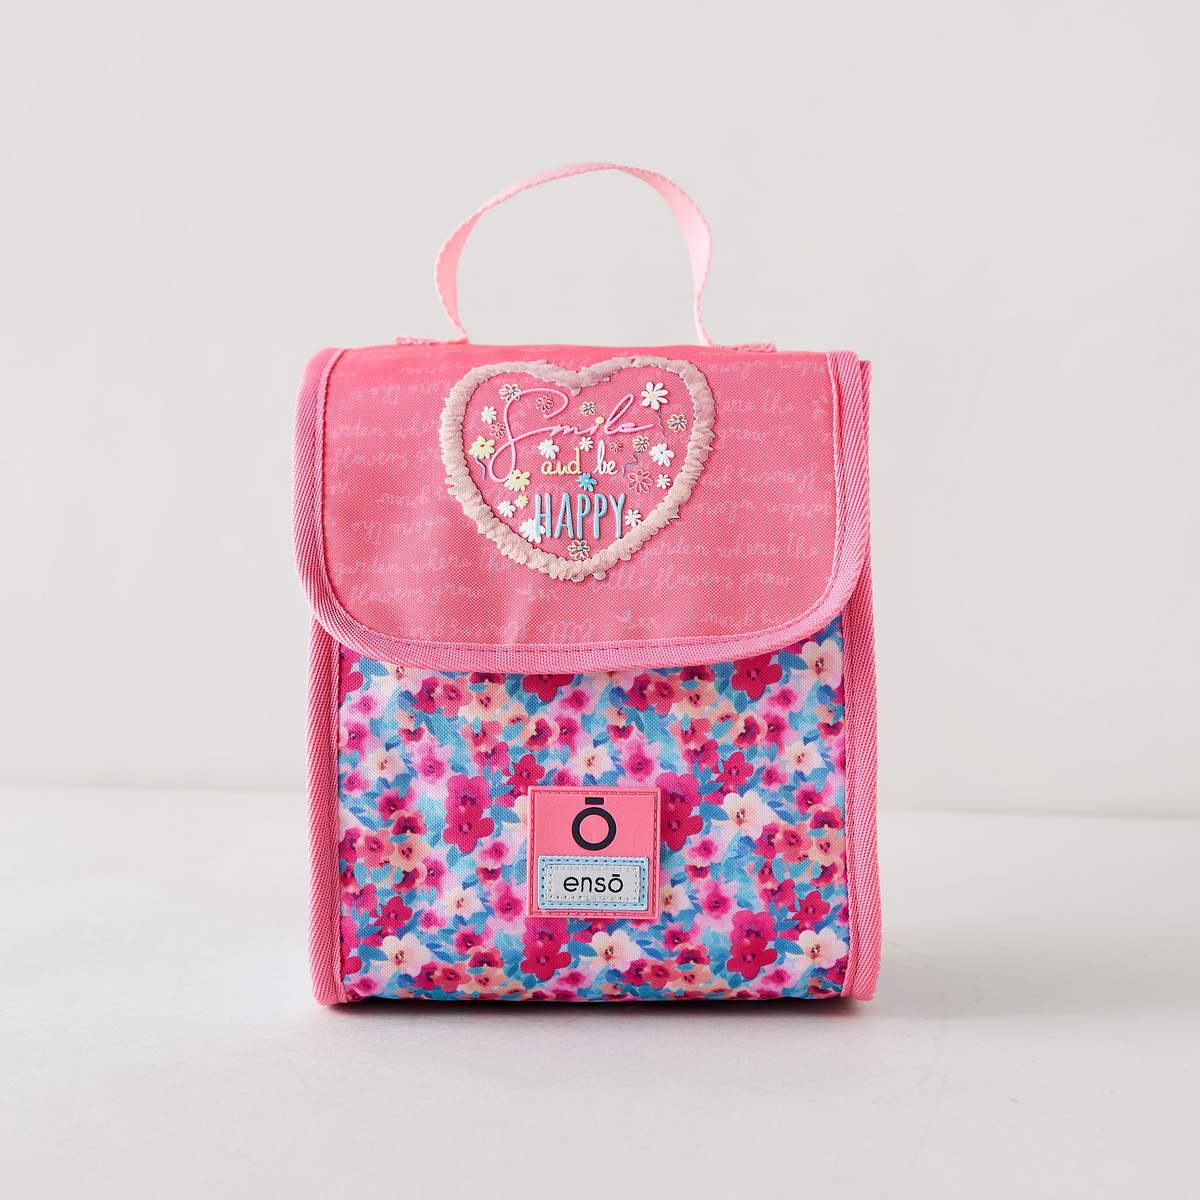 Enso Floral Print Lunch Bag with Flap Closure and Handle